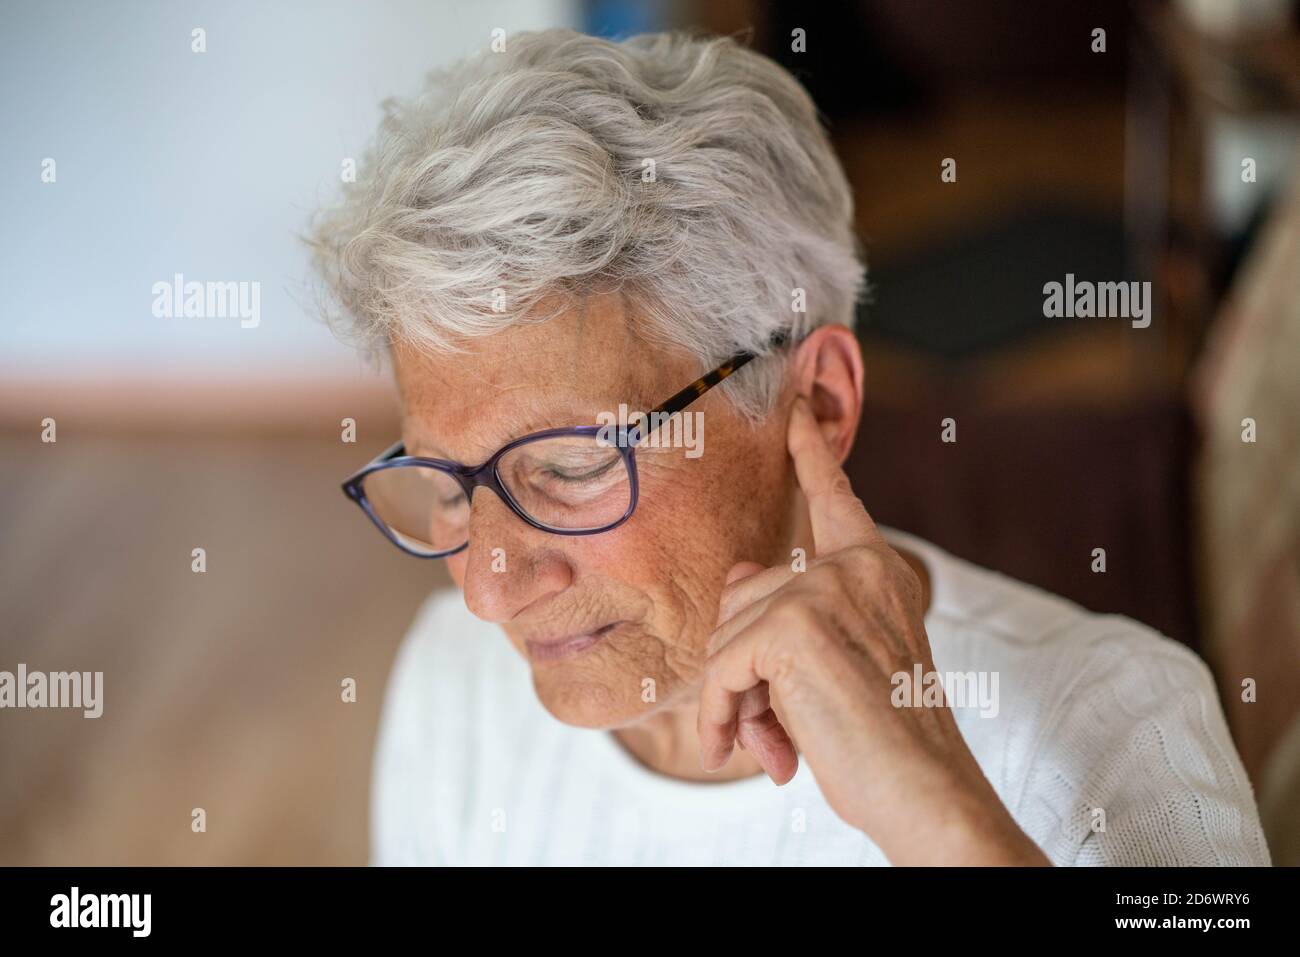 Woman touching her head and ear with earache. Stock Photo